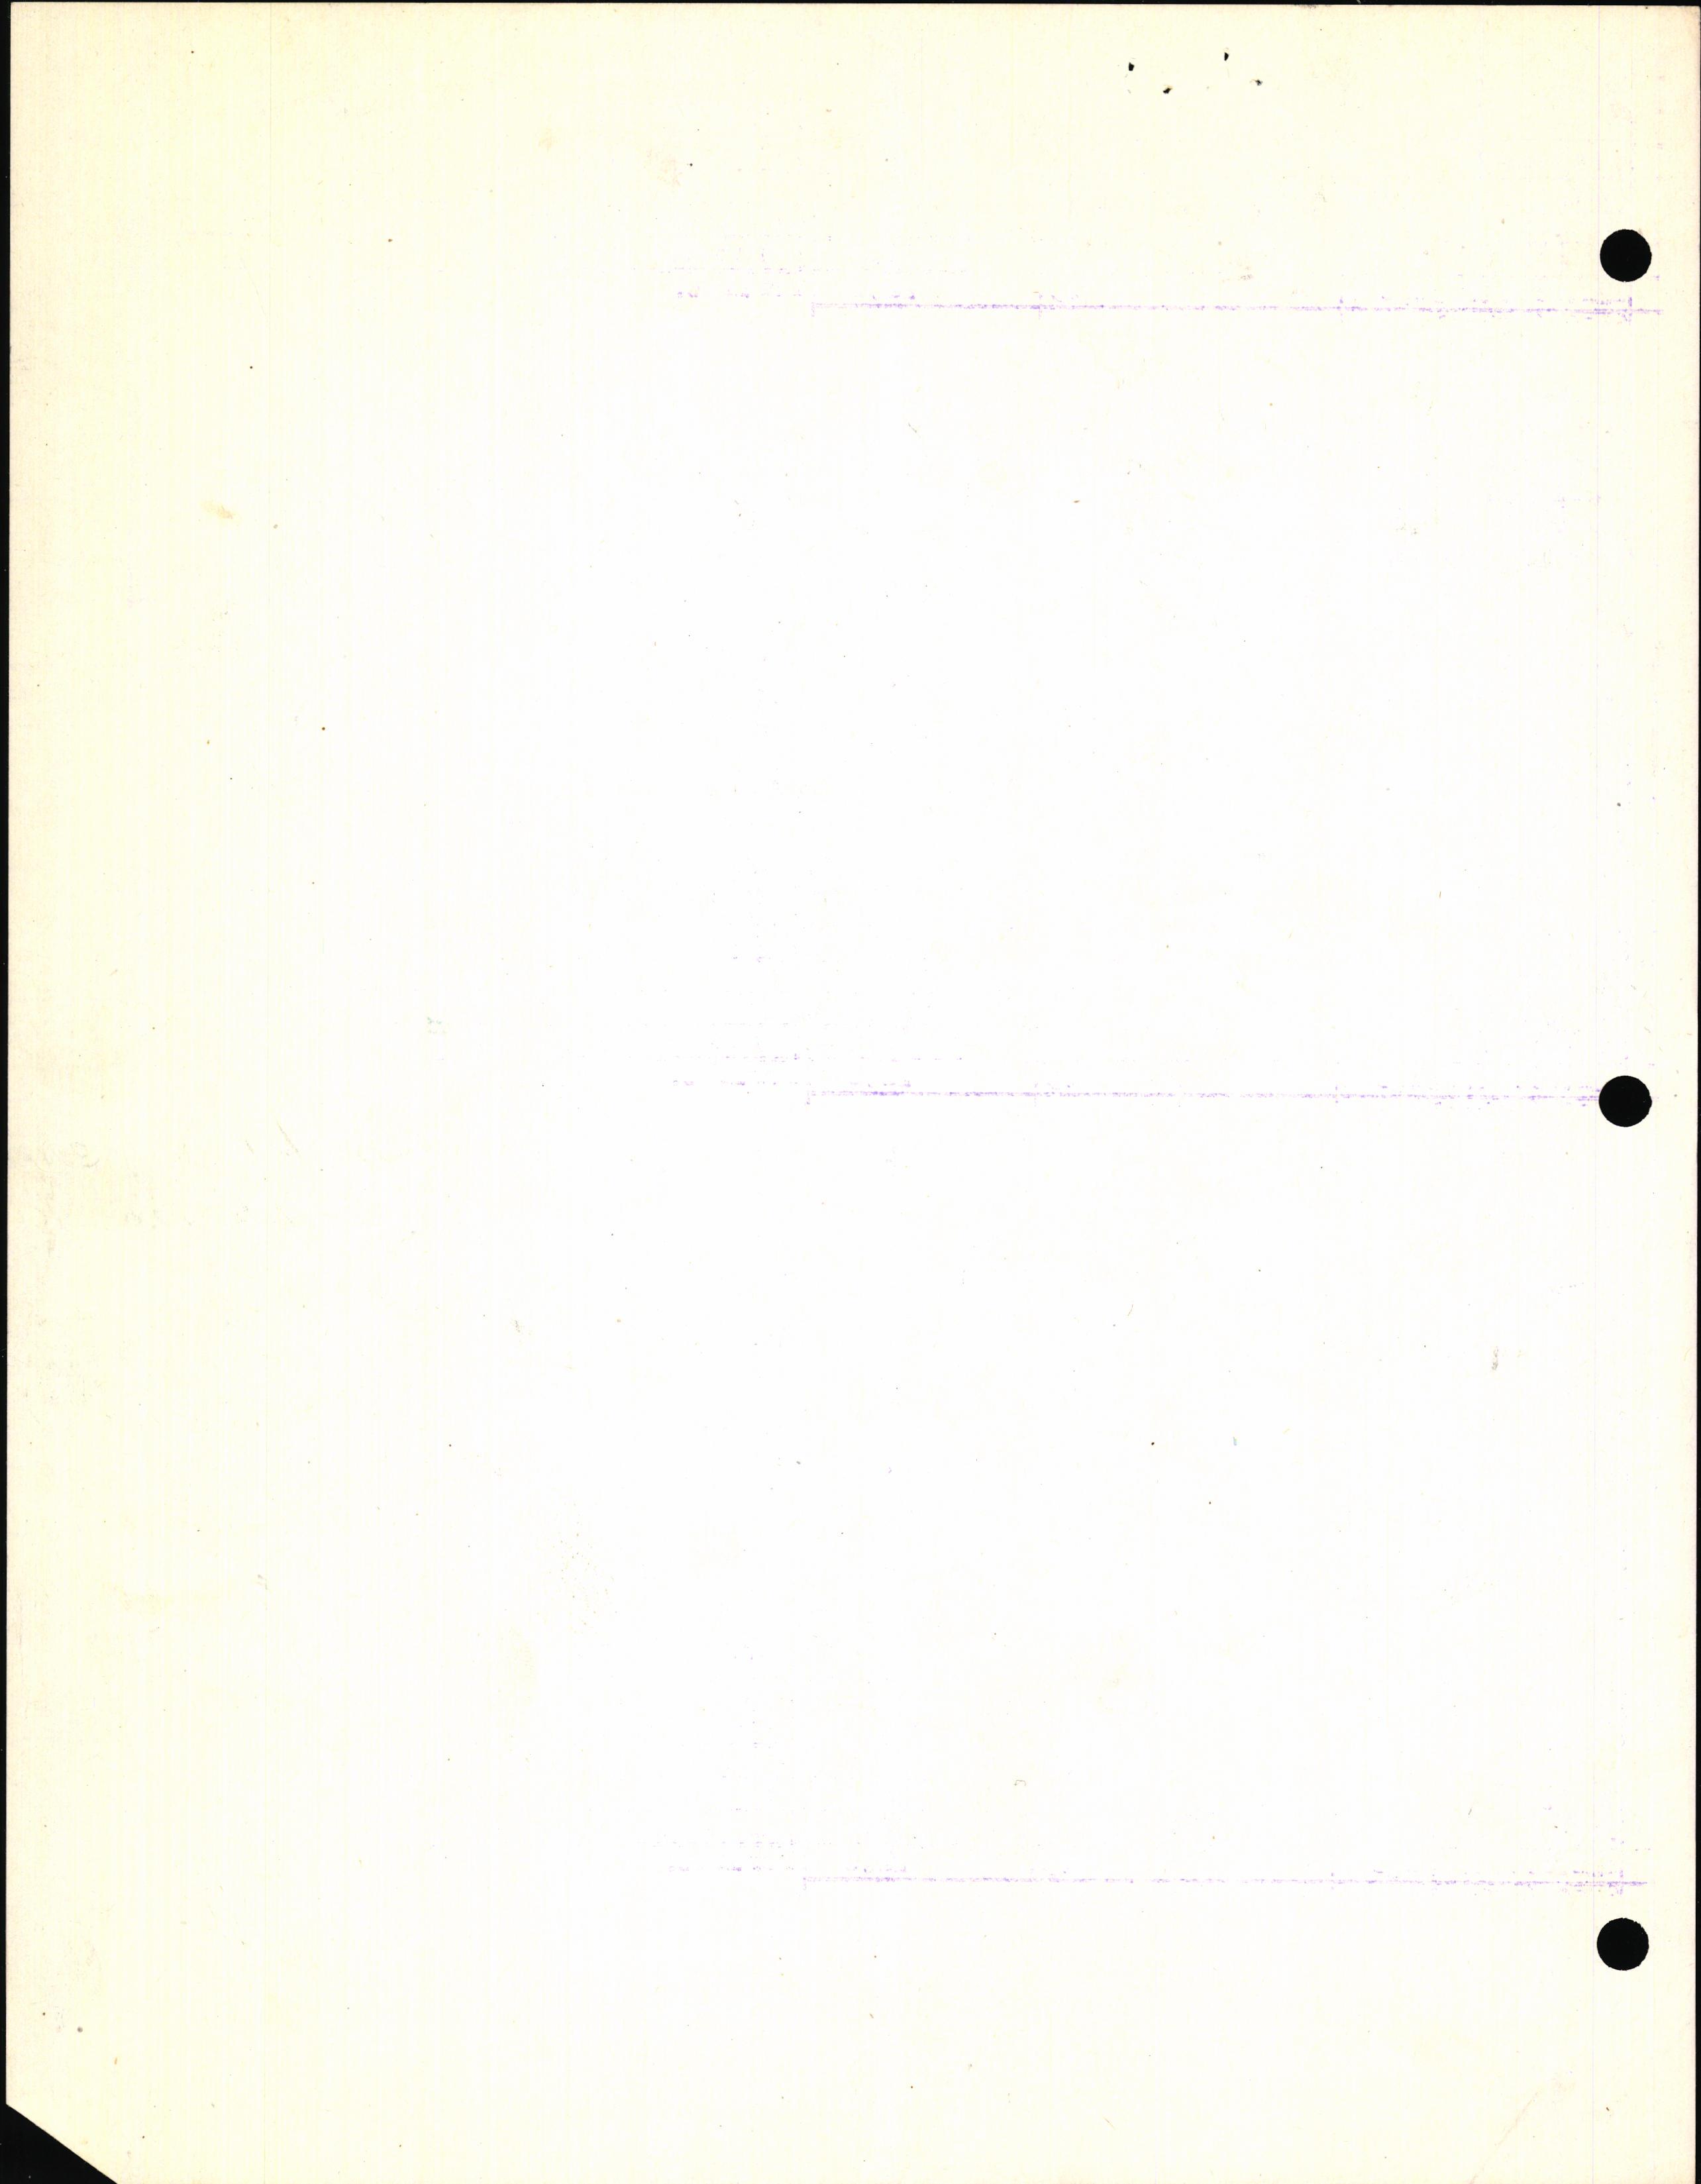 Sample page 6 from AirCorps Library document: Technical Information for Serial Number 1054